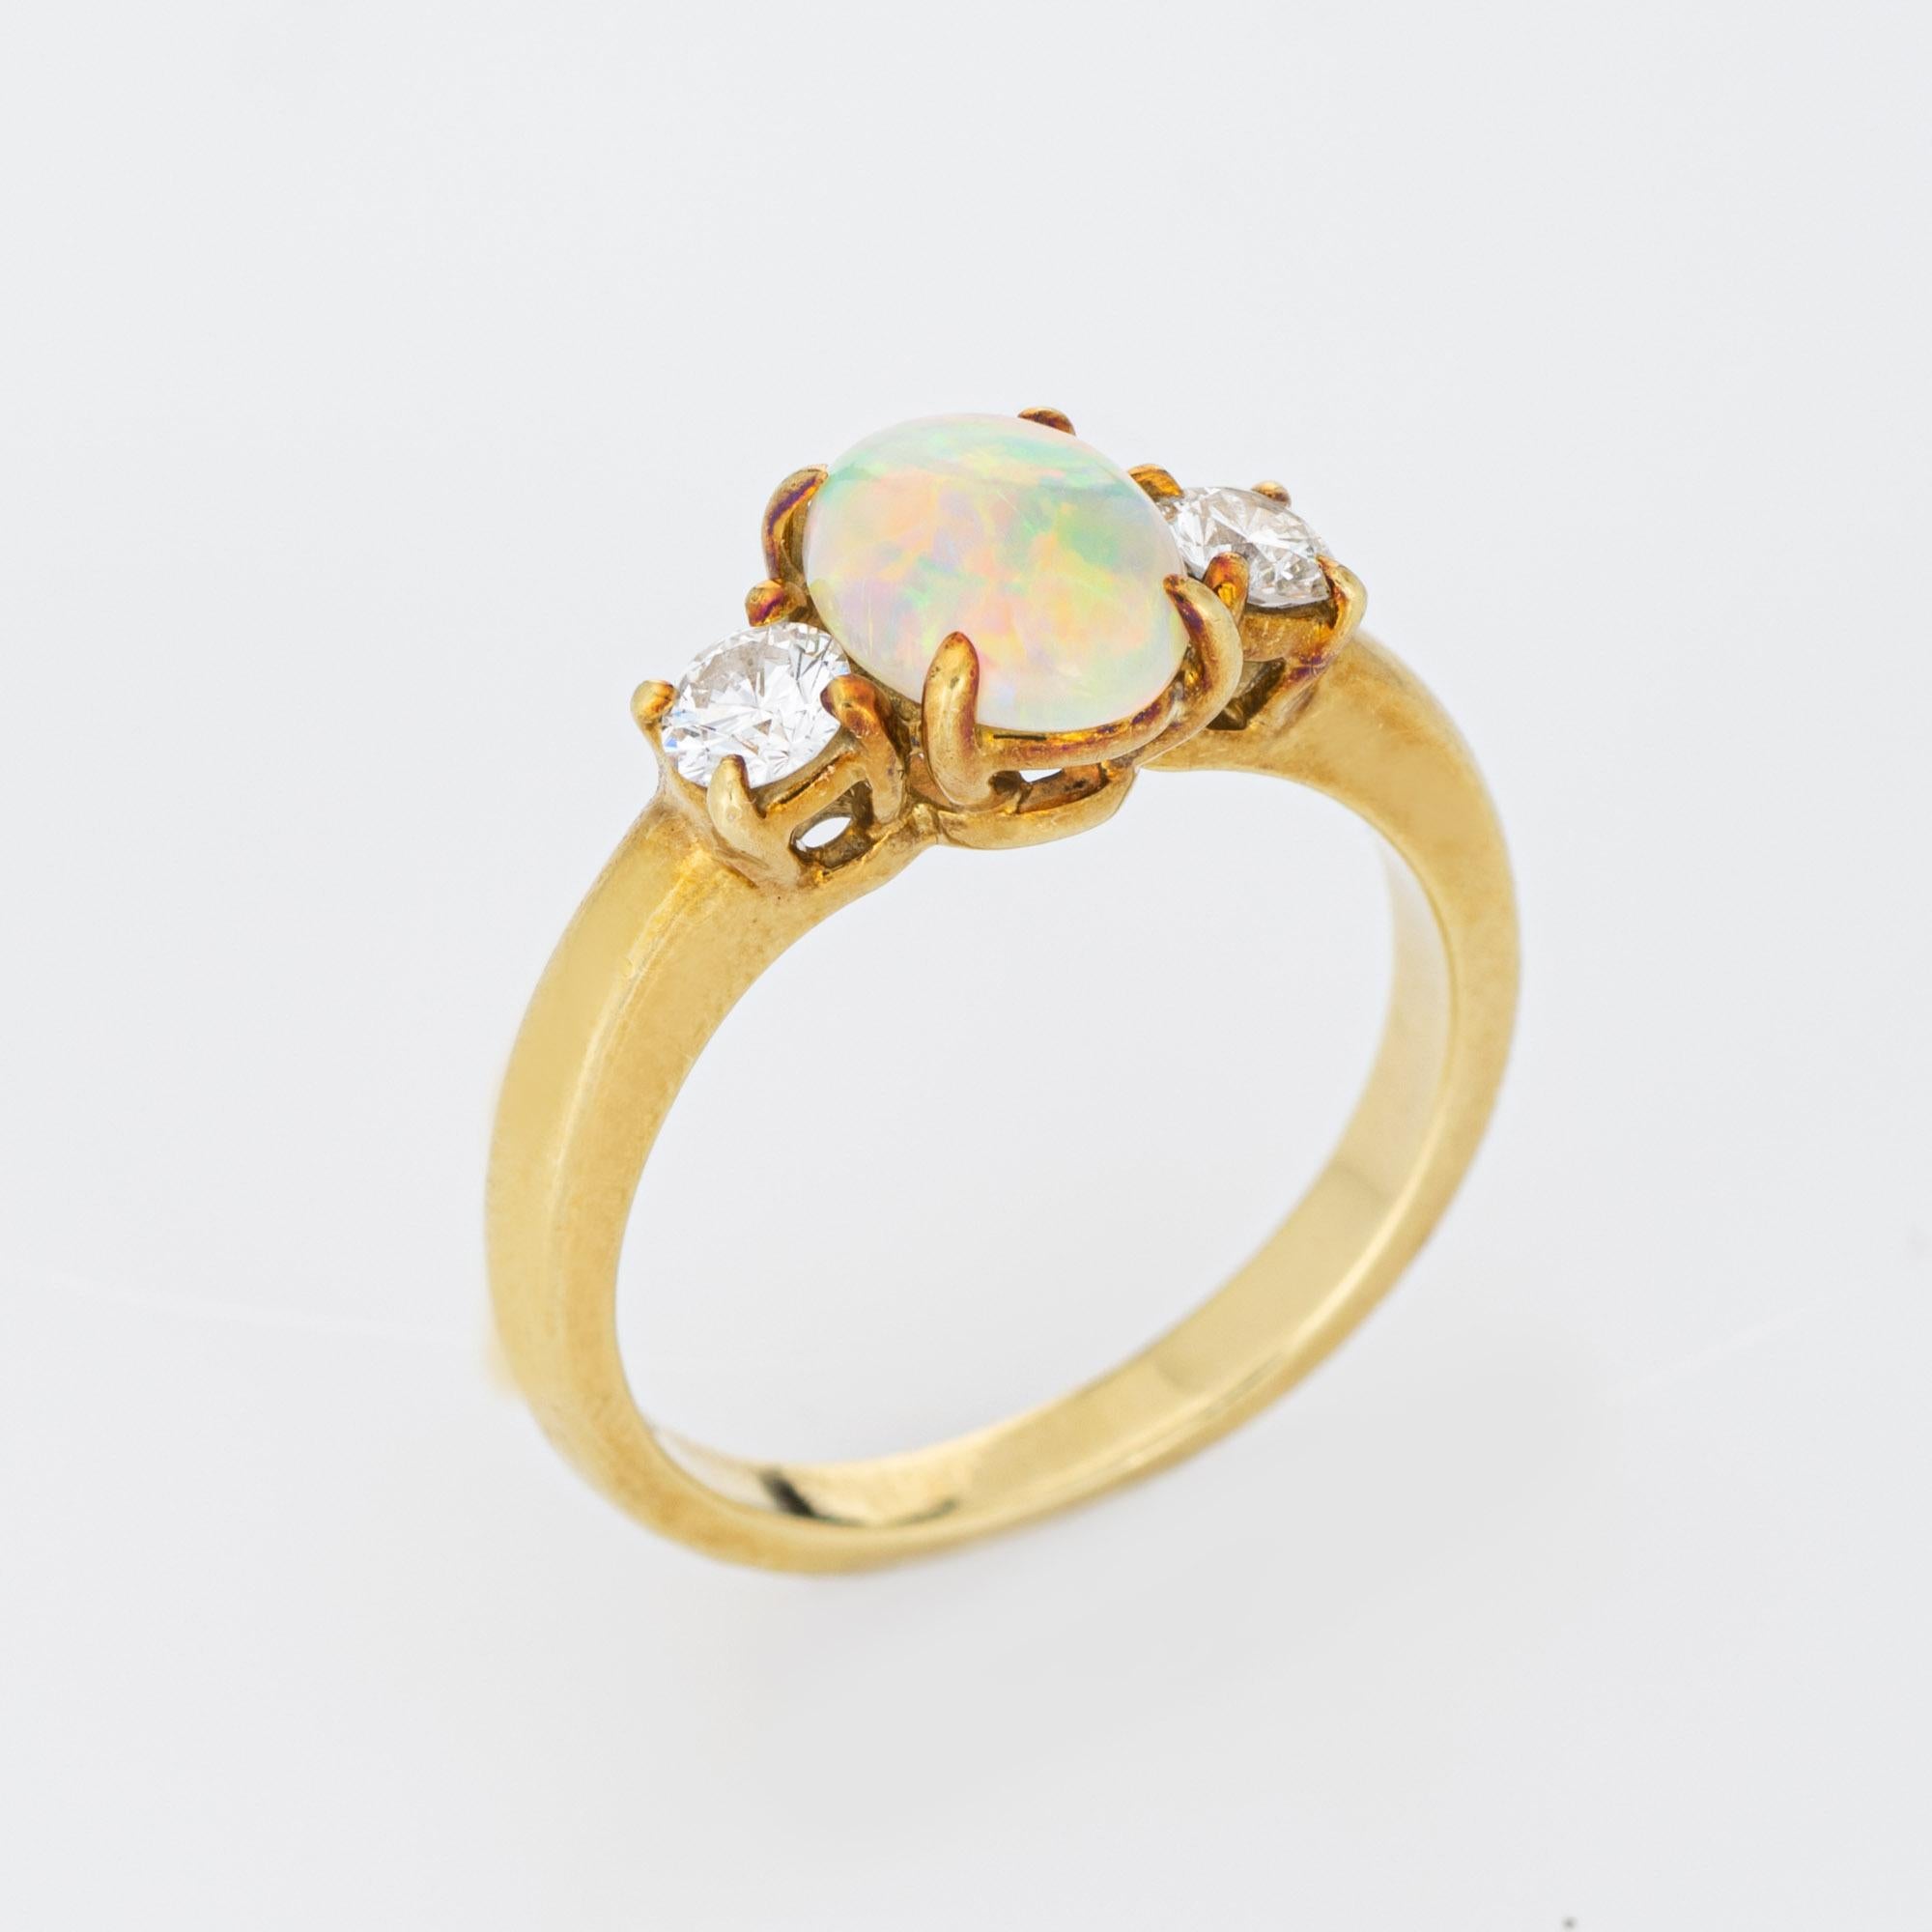 Vintage Tiffany & Co opal & diamond ring crafted in 18 karat yellow gold (circa 1980s to 1990s).  

Natural opal measures 8mm x 6mm (estimated at 1.25 carats), accented with two estimated 0.15 carat round brilliant cut diamonds. The total diamond